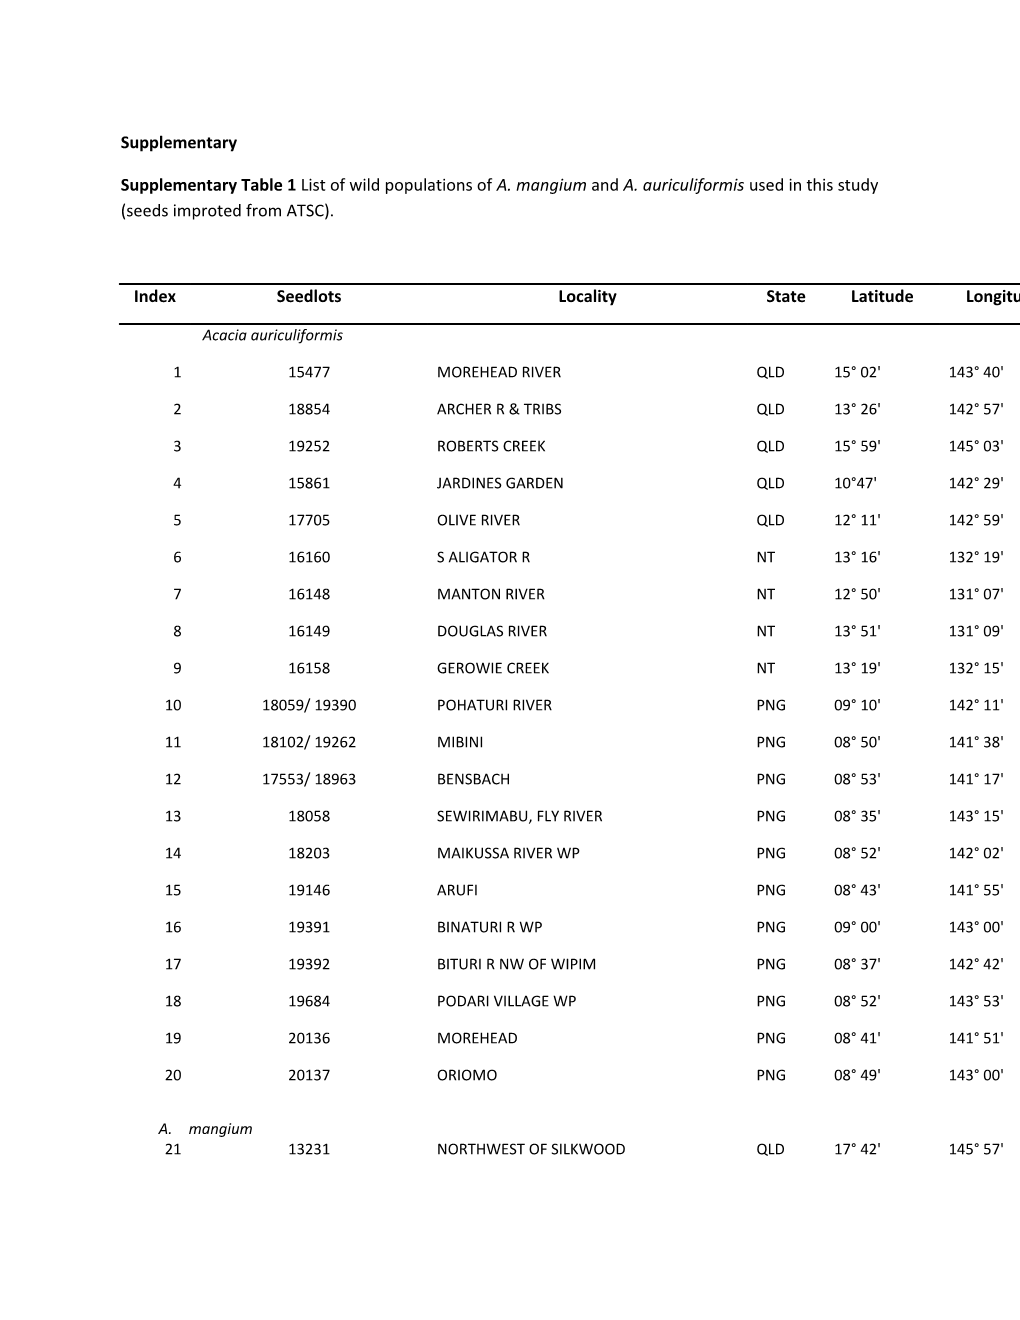 Supplementary Table 1 List of Wild Populations of A. Mangium and A. Auriculiformis Used